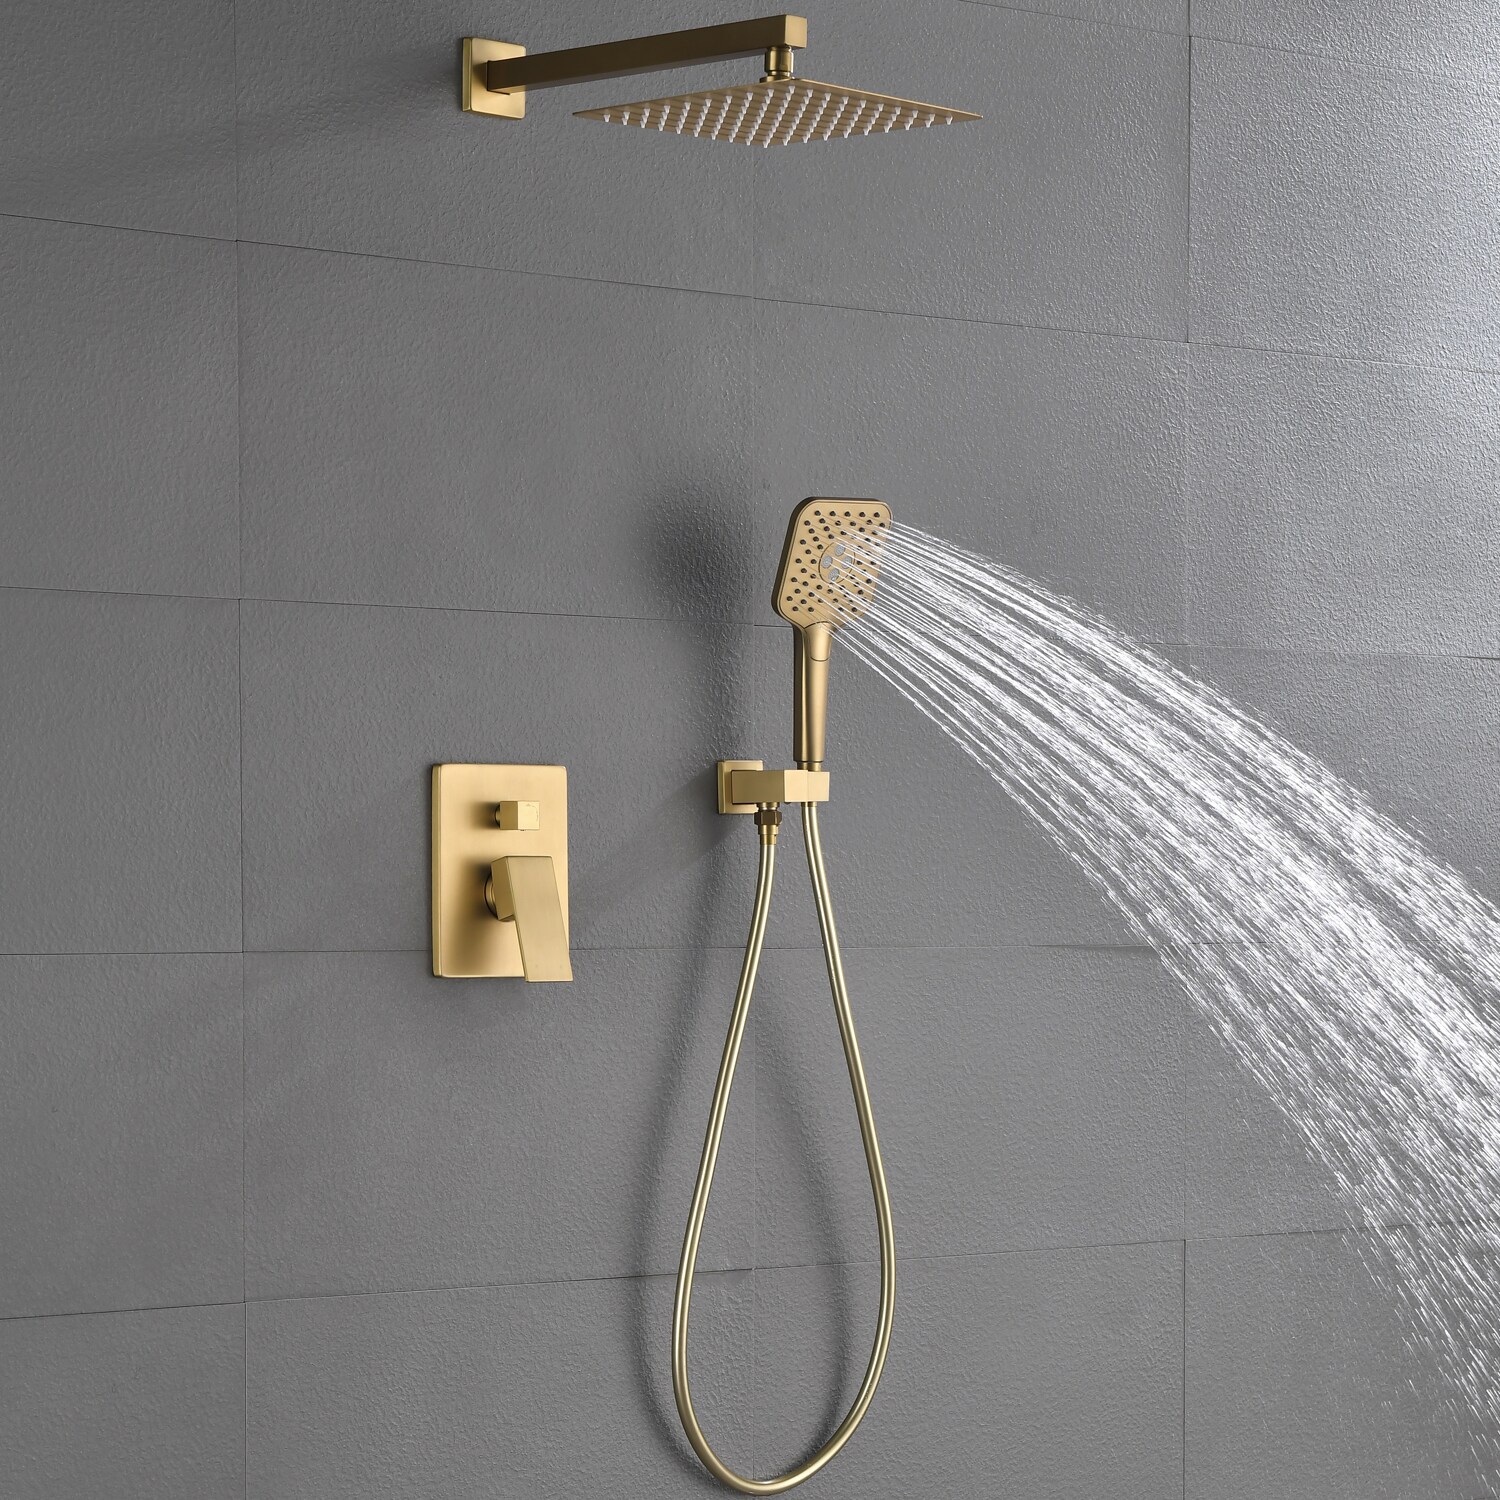 Pouuin Ob Brushed Gold Waterfall Built-In Shower System in the 